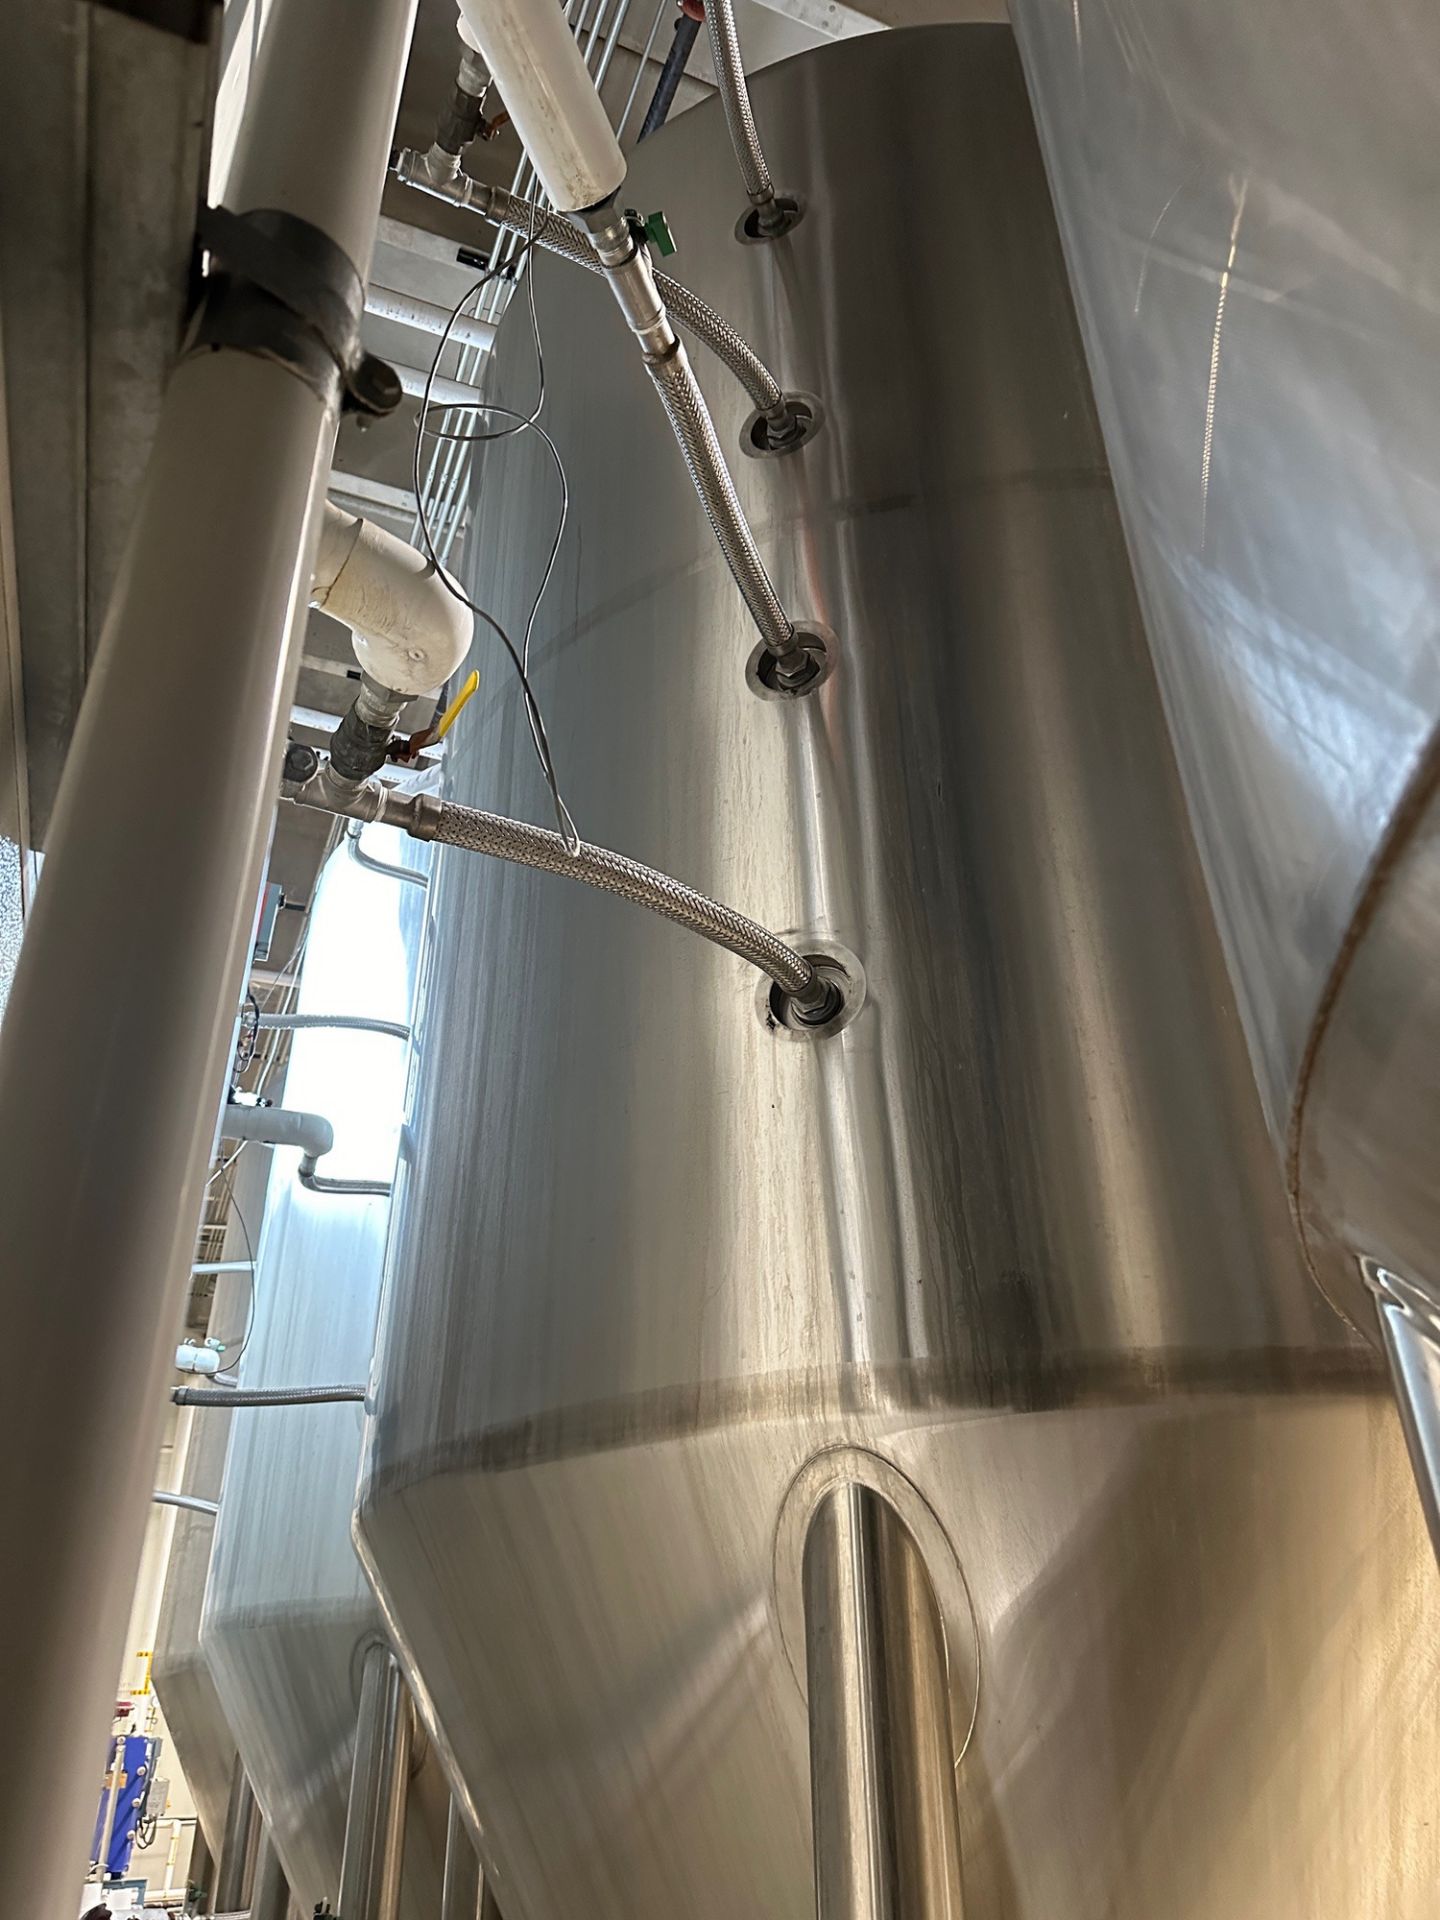 Premier Stainless 80 BBL Stainless Steel Fermentation Tank - Cone Bottom, Glycol Ja | Rig Fee $1850 - Image 2 of 4